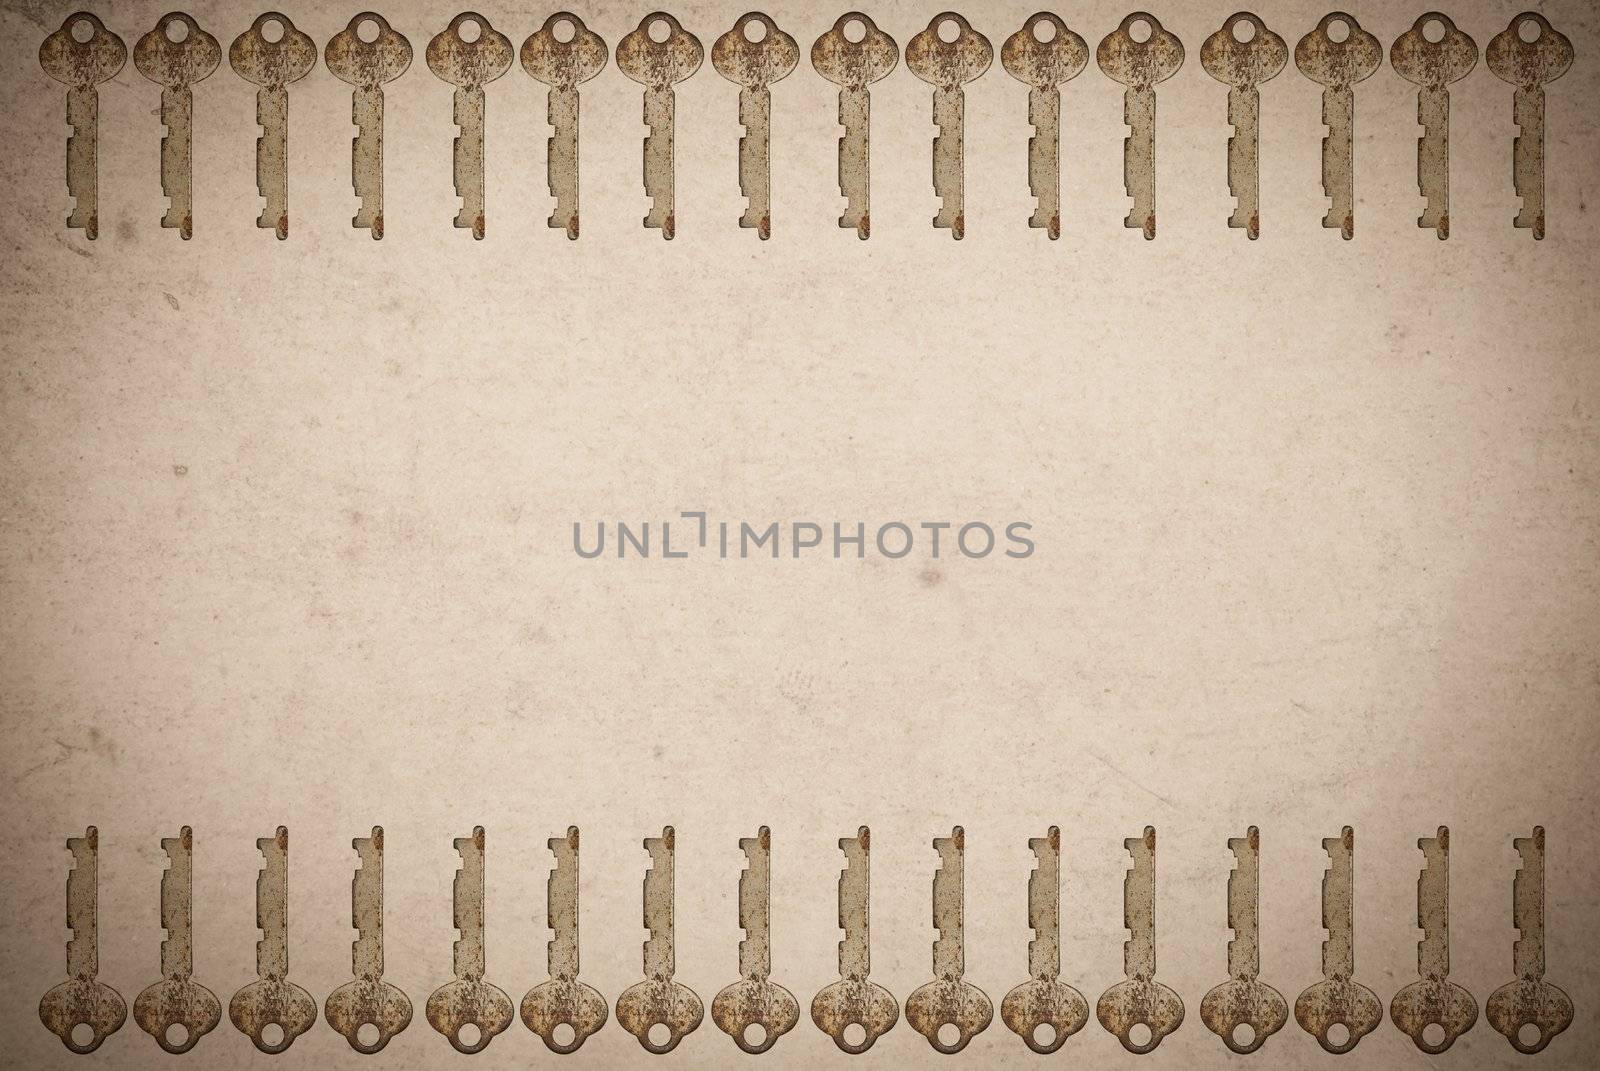 Rusty keys on old paper background with blended layers
